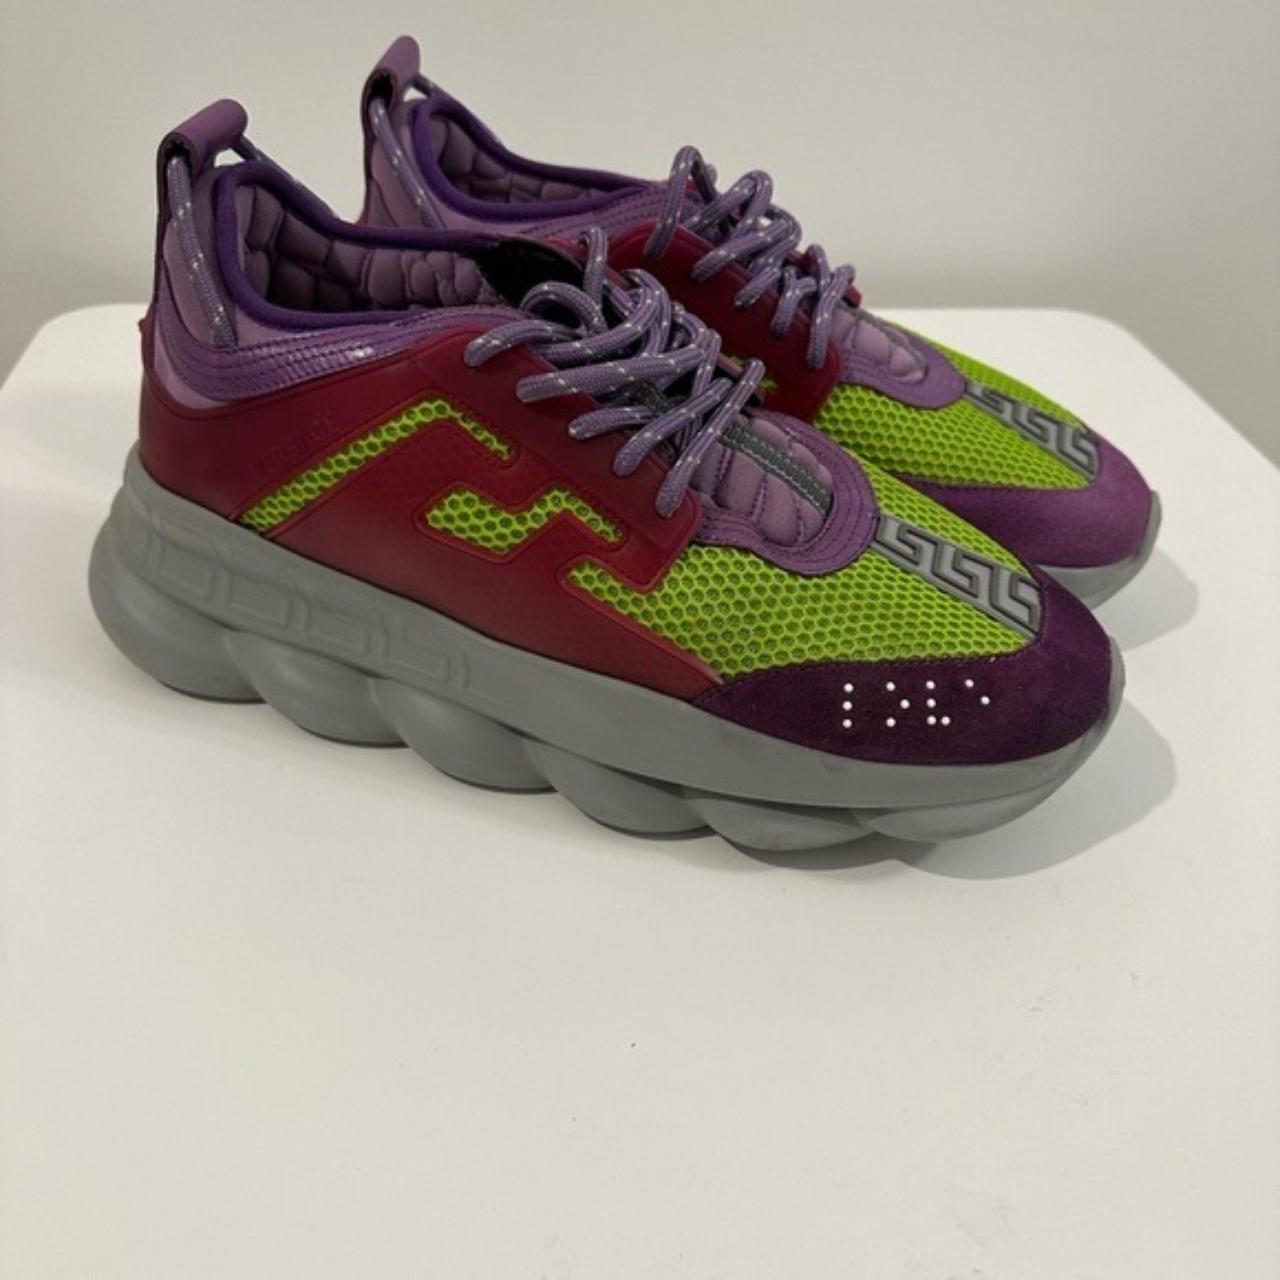 Green Purple Versace Chain Reaction! Pre Owned Size 9 (42EU) $400